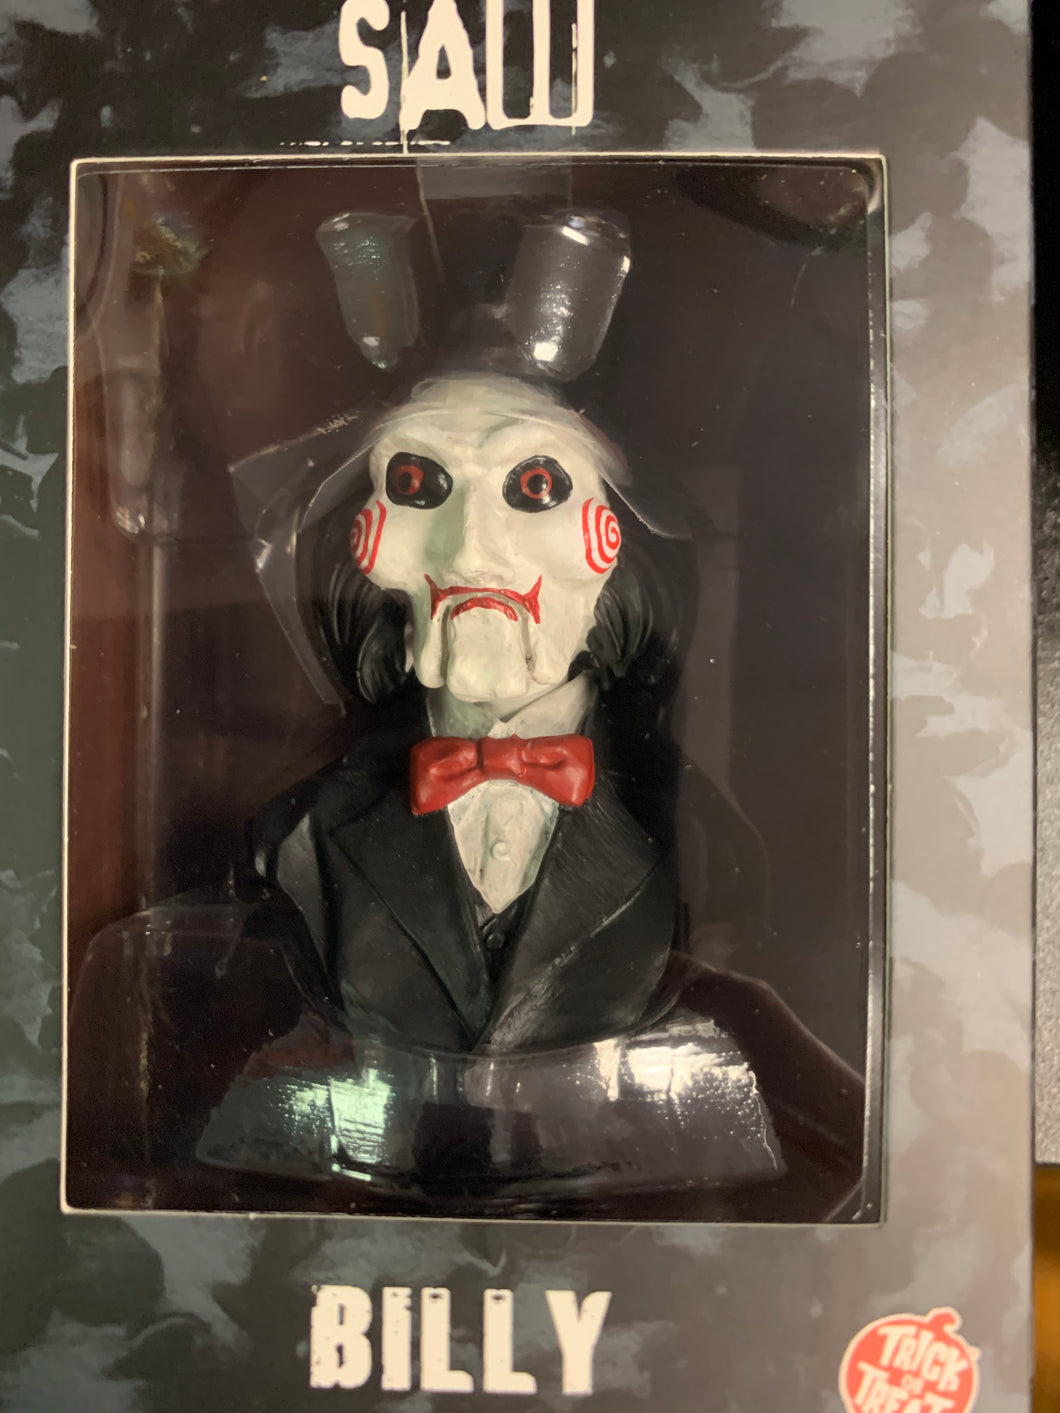 HOLIDAY HORRORS - SAW BILLY PUPPET ORNAMENT